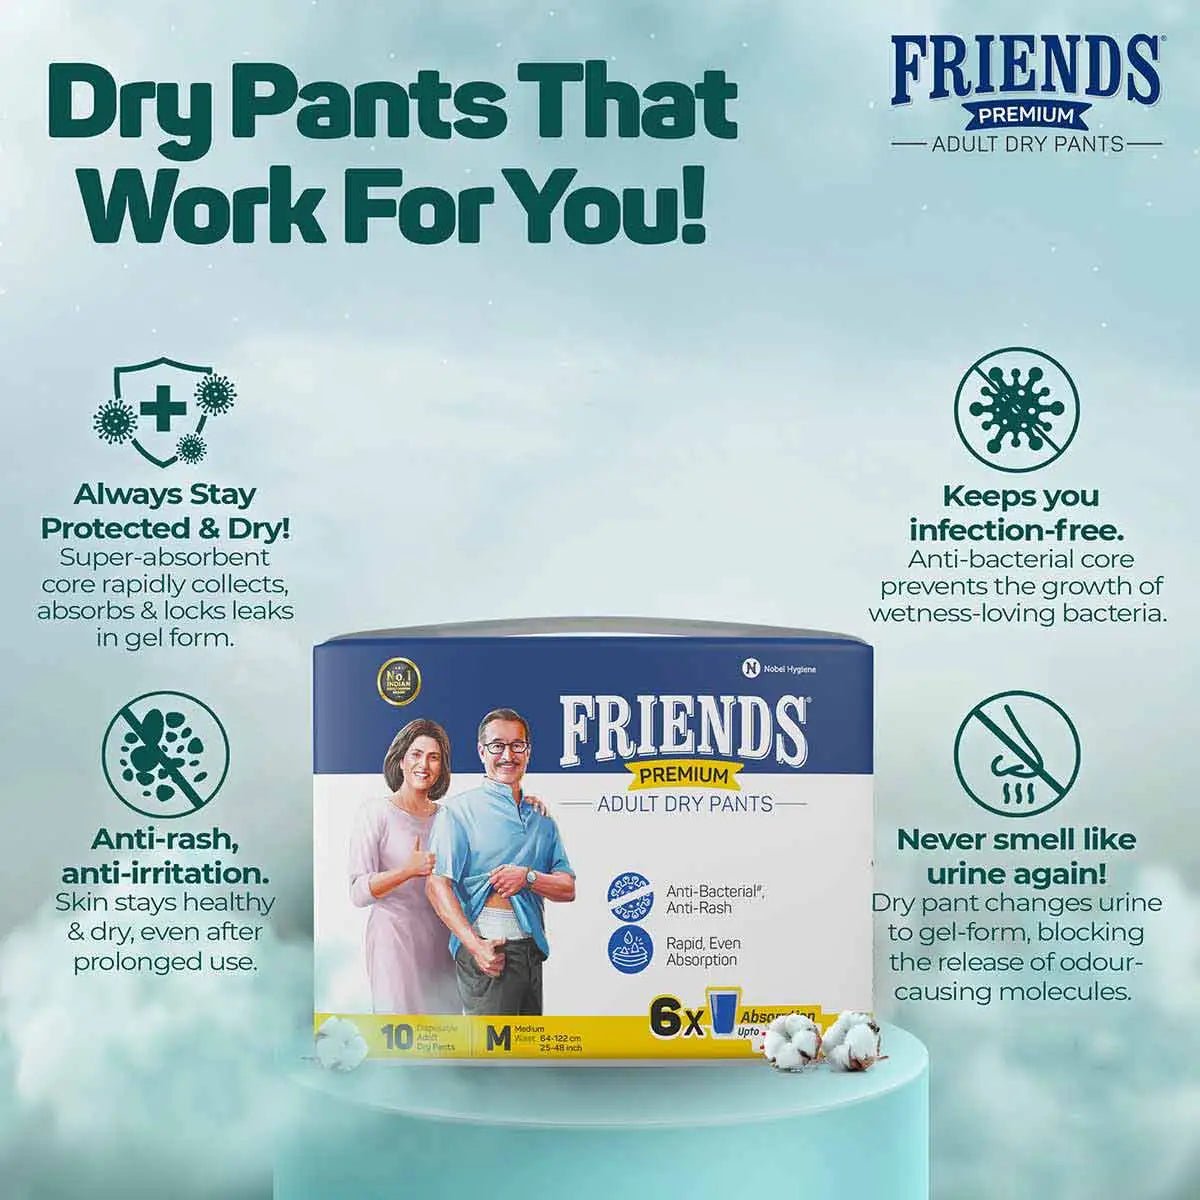 Friends UltraThins Slim Fit Adult Diapers (Dry Pants) for Women - Large – 9  Count - with thin design, peach colour, and anti-rash - Waist Size 30-56  Inch ;76-142 cm : Amazon.in: Clothing & Accessories